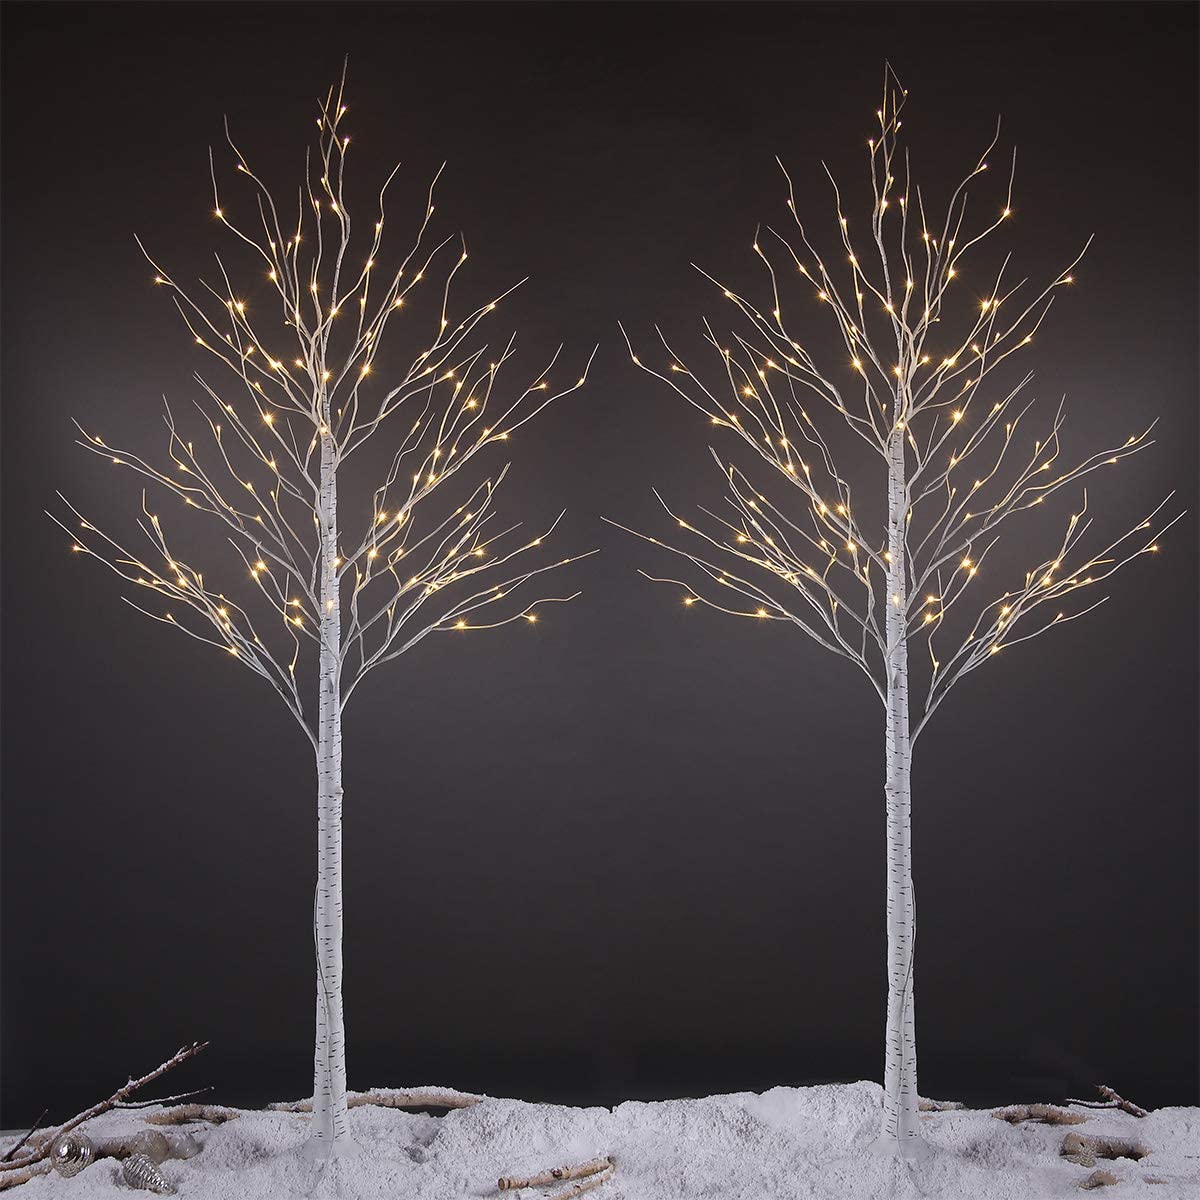 8ft Lighted Birch Tree 132 LED Artificial Tree for Decoration Inside and Outside , Home Patio Wedding Festival Christmas Decor , Warm White